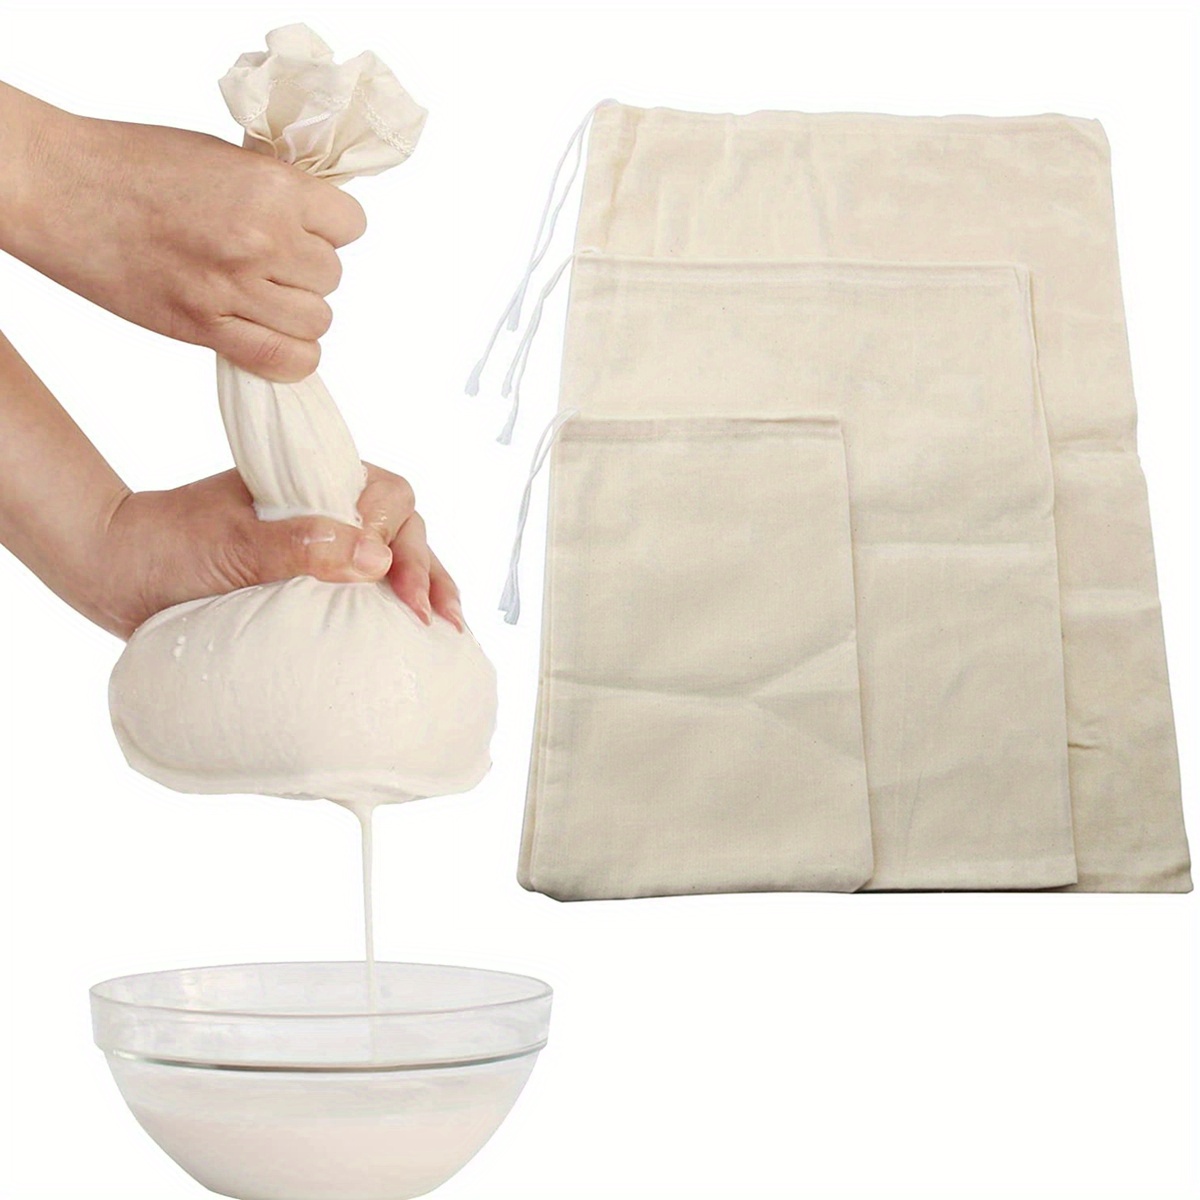 Muslin Cloths for Cooking, Unbleached Cheese Cloths,Cotton Reusable and  Washable Cheese Cloths for Straining 